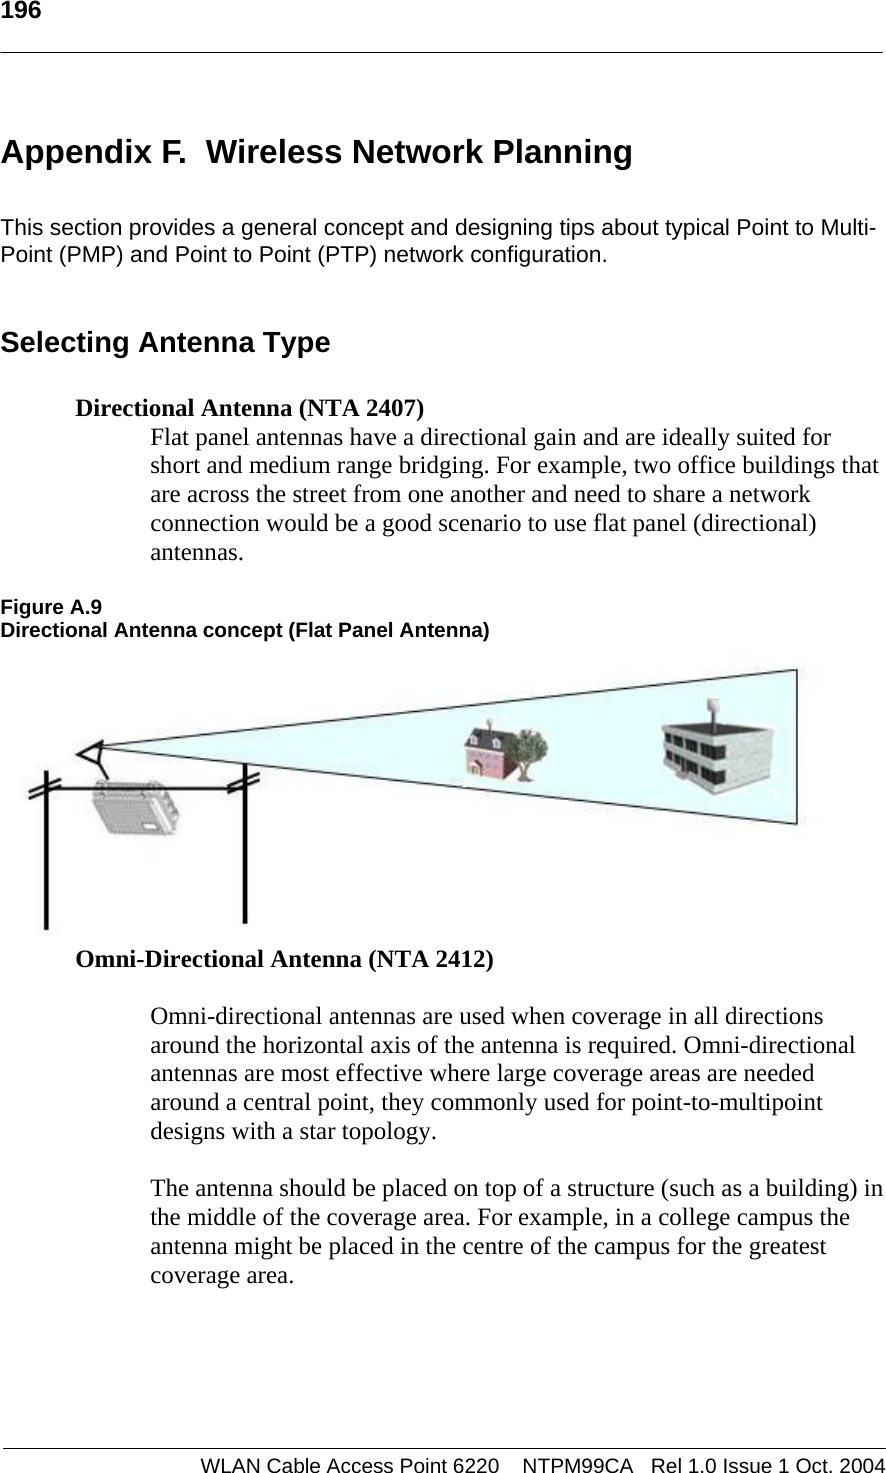   196   Appendix F.  Wireless Network Planning  This section provides a general concept and designing tips about typical Point to Multi-Point (PMP) and Point to Point (PTP) network configuration.    Selecting Antenna Type  Directional Antenna (NTA 2407) Flat panel antennas have a directional gain and are ideally suited for short and medium range bridging. For example, two office buildings that are across the street from one another and need to share a network connection would be a good scenario to use flat panel (directional) antennas.  Figure A.9 Directional Antenna concept (Flat Panel Antenna)  Omni-Directional Antenna (NTA 2412)  Omni-directional antennas are used when coverage in all directions around the horizontal axis of the antenna is required. Omni-directional antennas are most effective where large coverage areas are needed around a central point, they commonly used for point-to-multipoint designs with a star topology.  The antenna should be placed on top of a structure (such as a building) in the middle of the coverage area. For example, in a college campus the antenna might be placed in the centre of the campus for the greatest coverage area.   WLAN Cable Access Point 6220    NTPM99CA   Rel 1.0 Issue 1 Oct. 2004